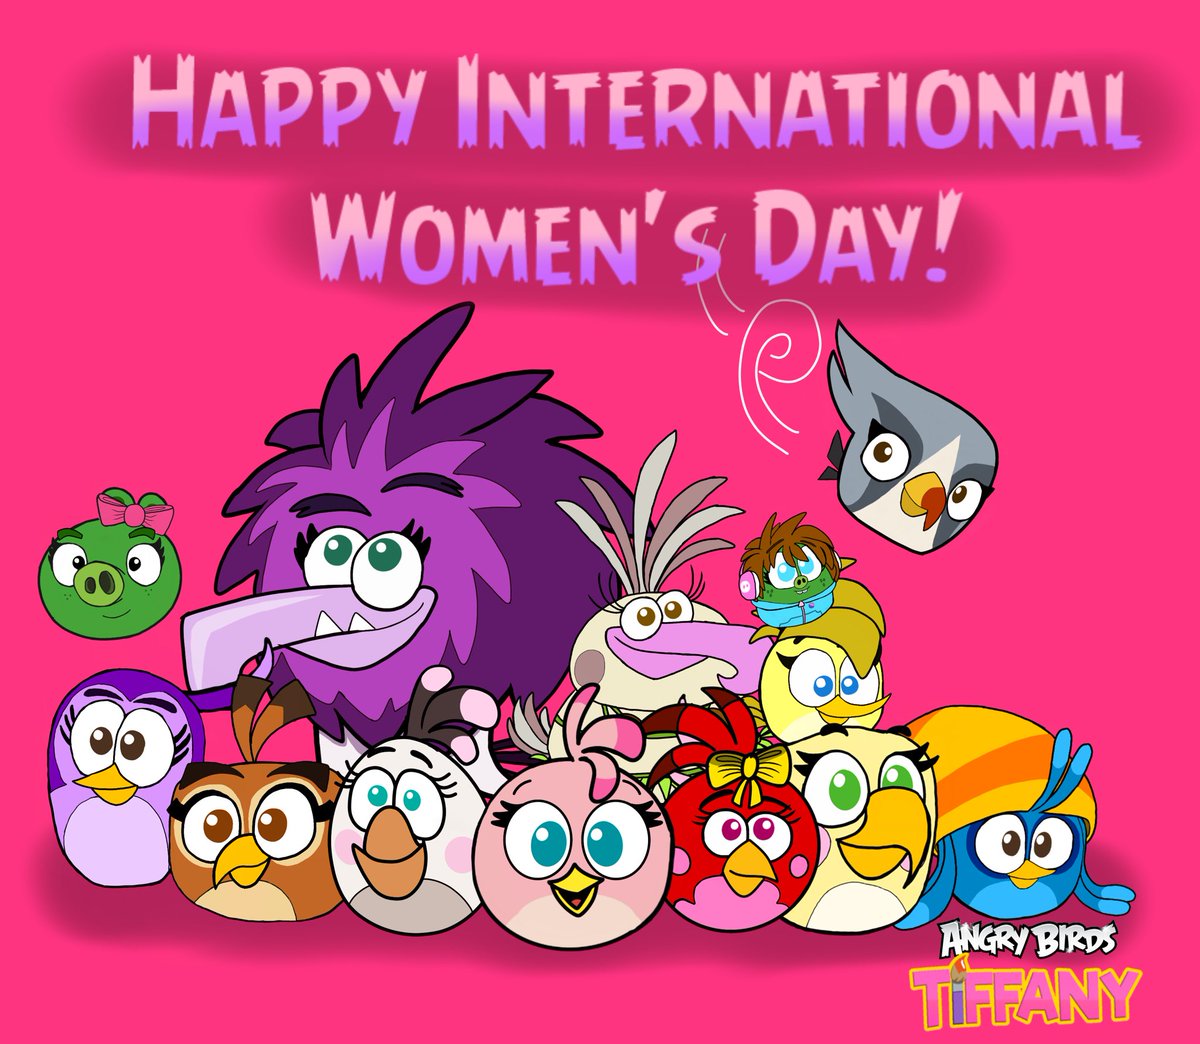 Happy #InternationalWomensDay to all the girls out in the world! 

#angrybirds #angrybirdstiffany #angrybirdstiffany #angrybirdstoons #angrybirdsstella